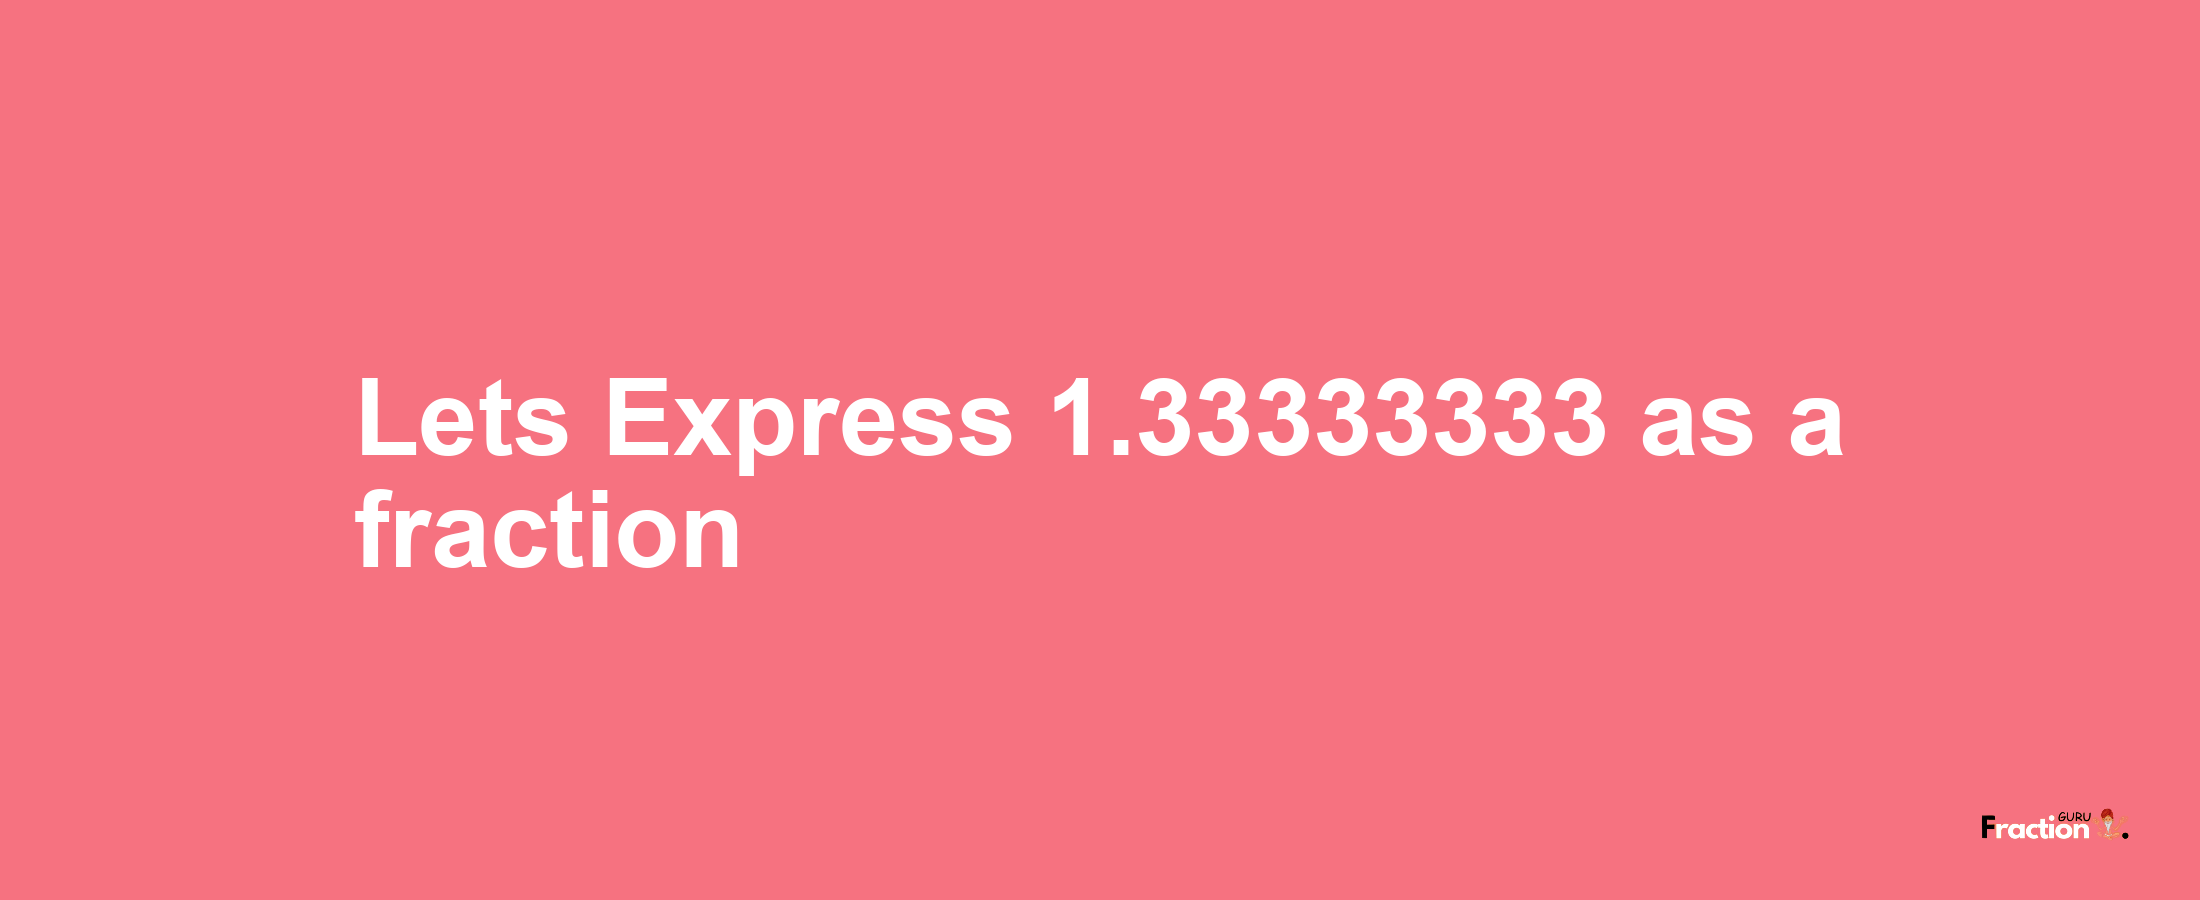 Lets Express 1.33333333 as afraction